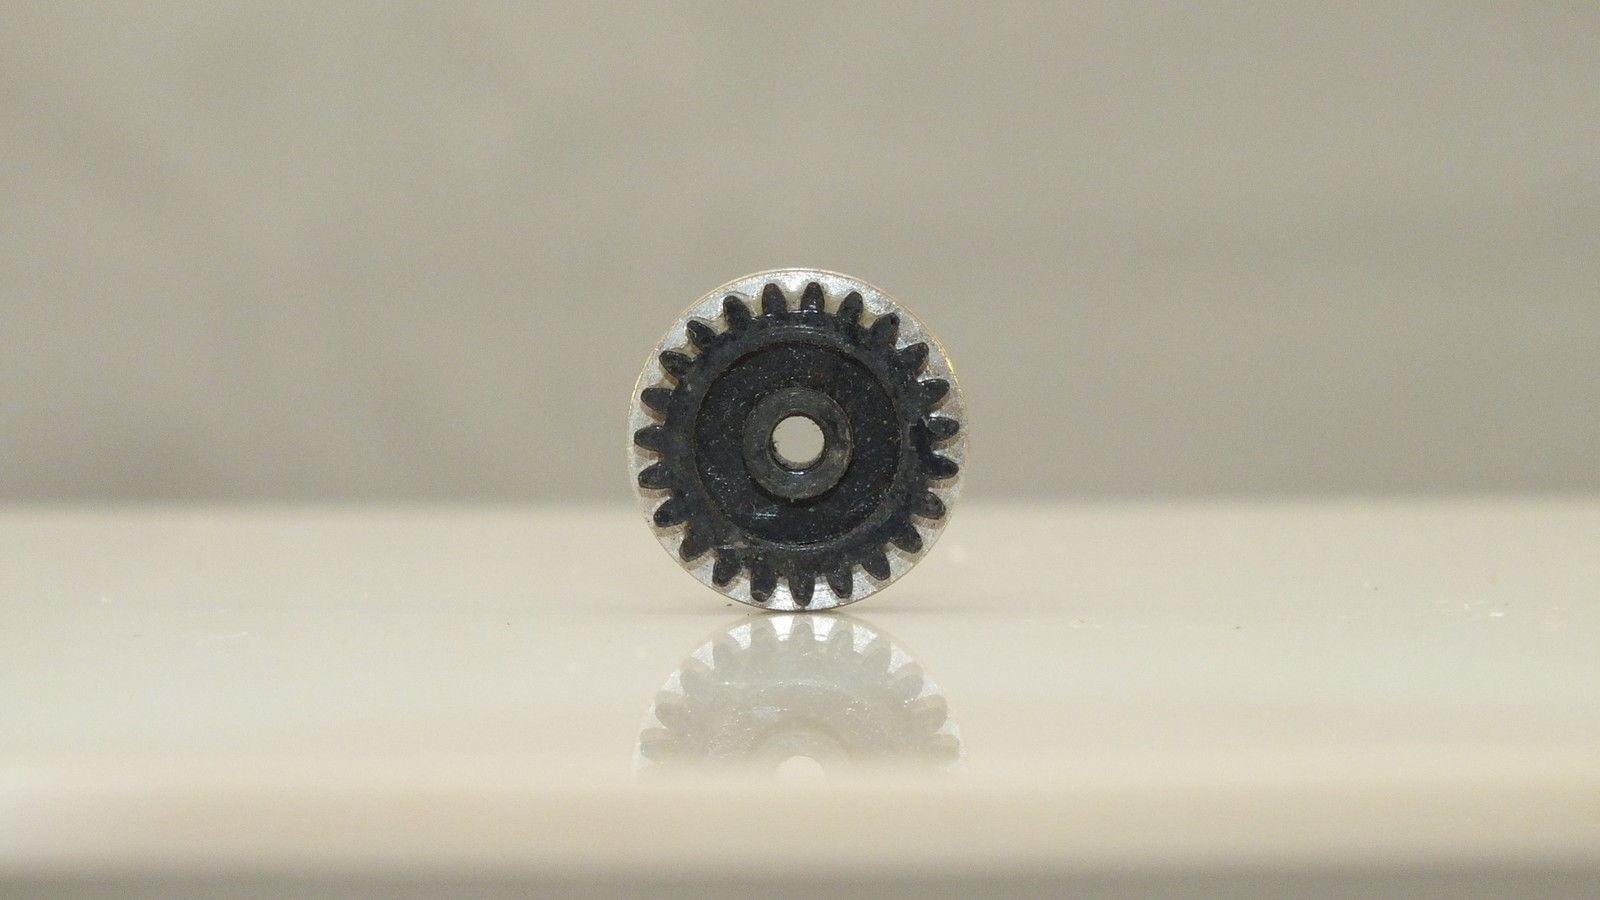 X816 #  HORNBY TRIANG FLANGED WHEEL BLACK RINGFIED POWER UNIT   B6A